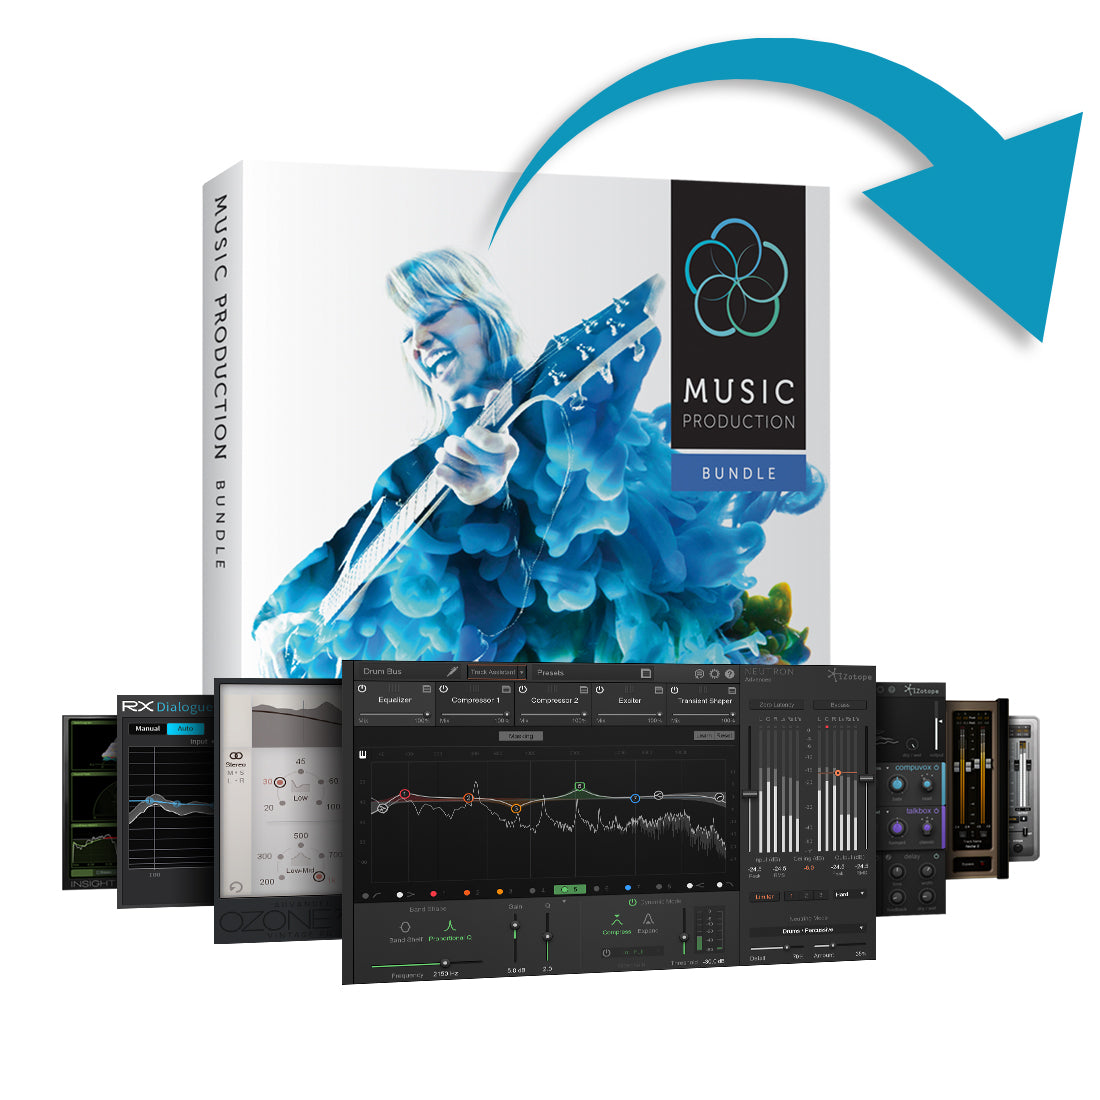 iZotope Music Production Bundle 2 Crossgrade From Any Advanced iZotope